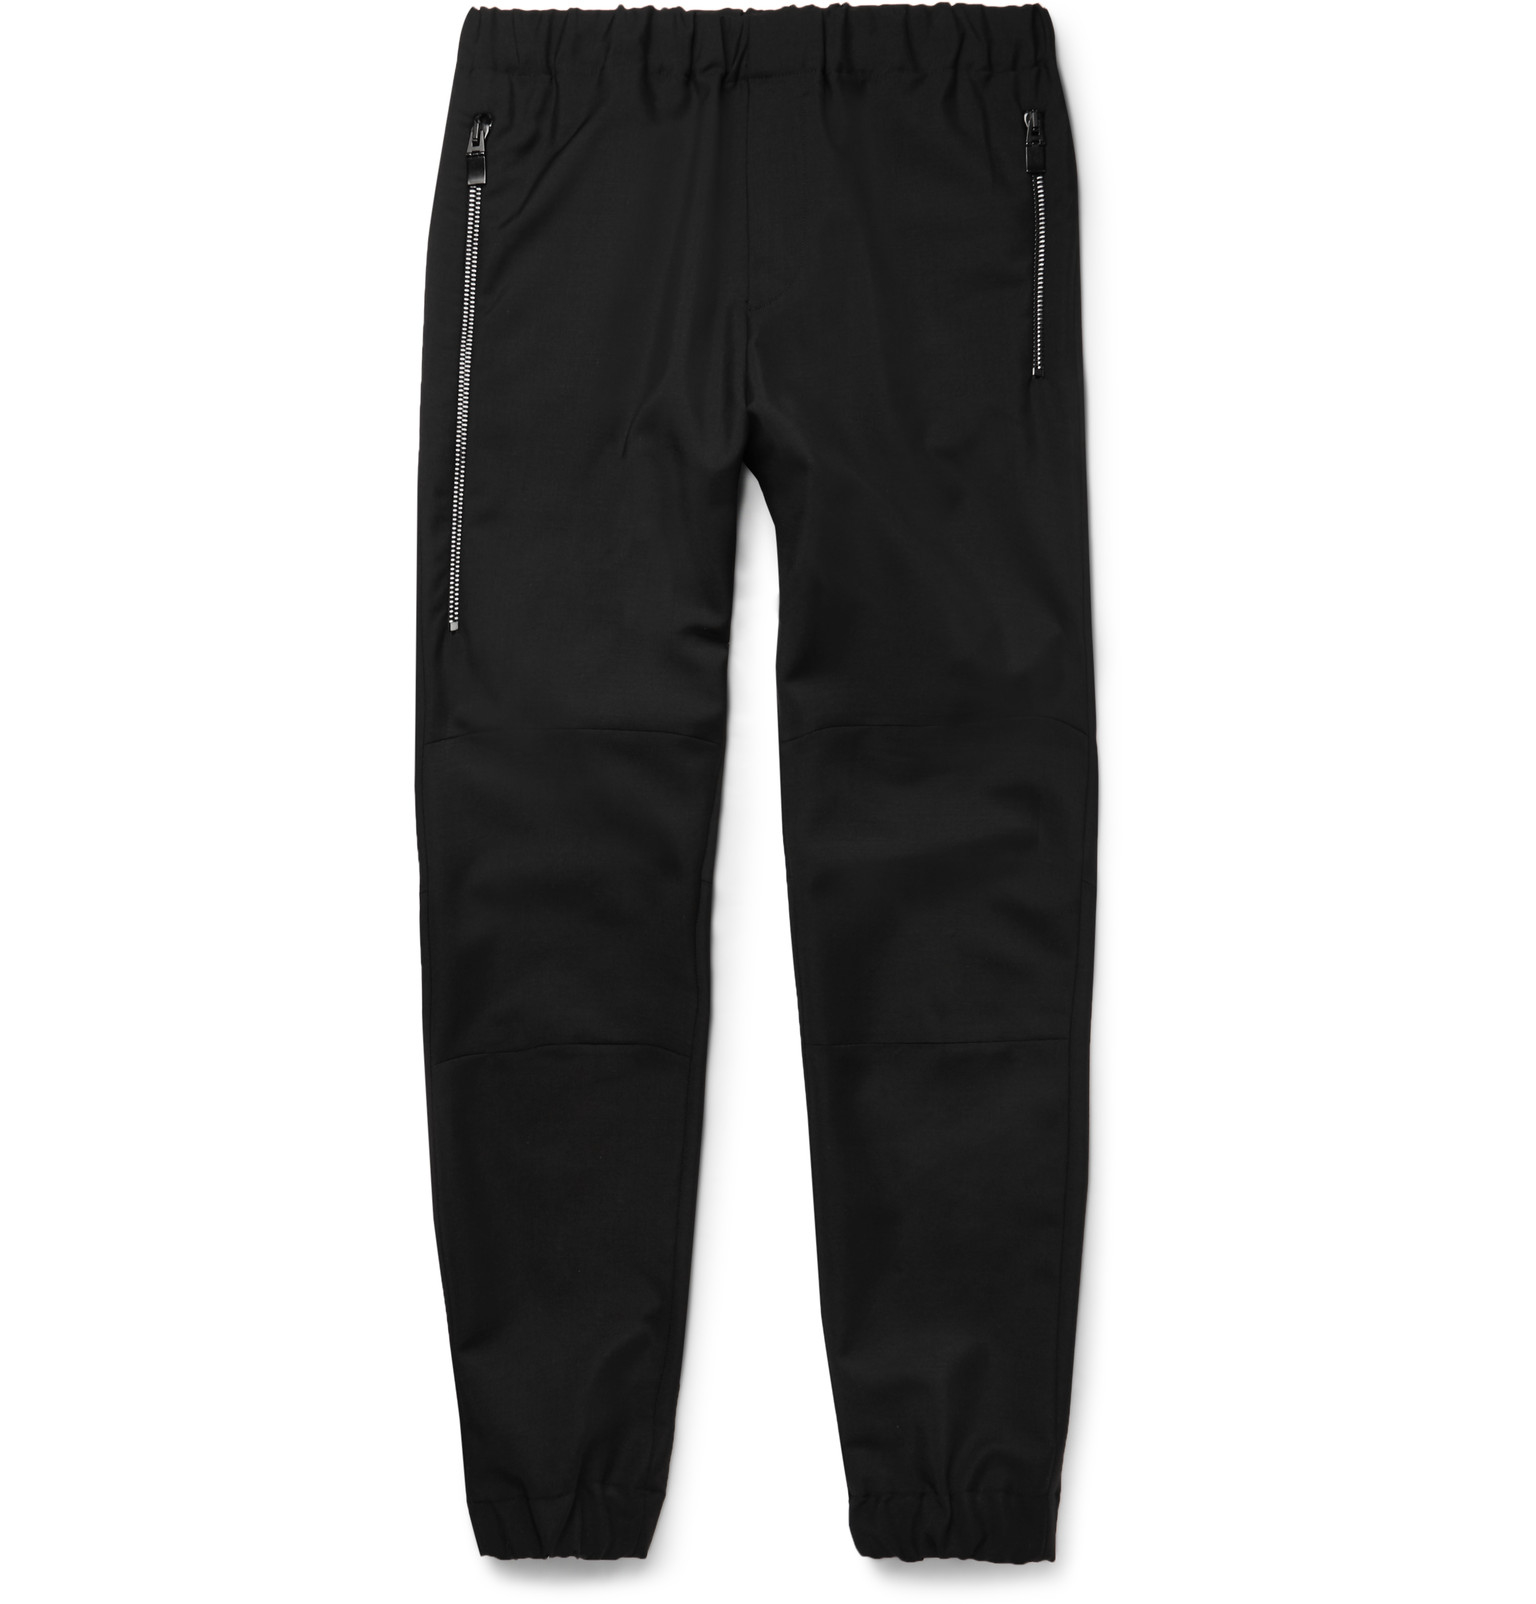 Balenciaga Tapered Wool And Mohair-blend Sweatpants in Black for Men - Lyst